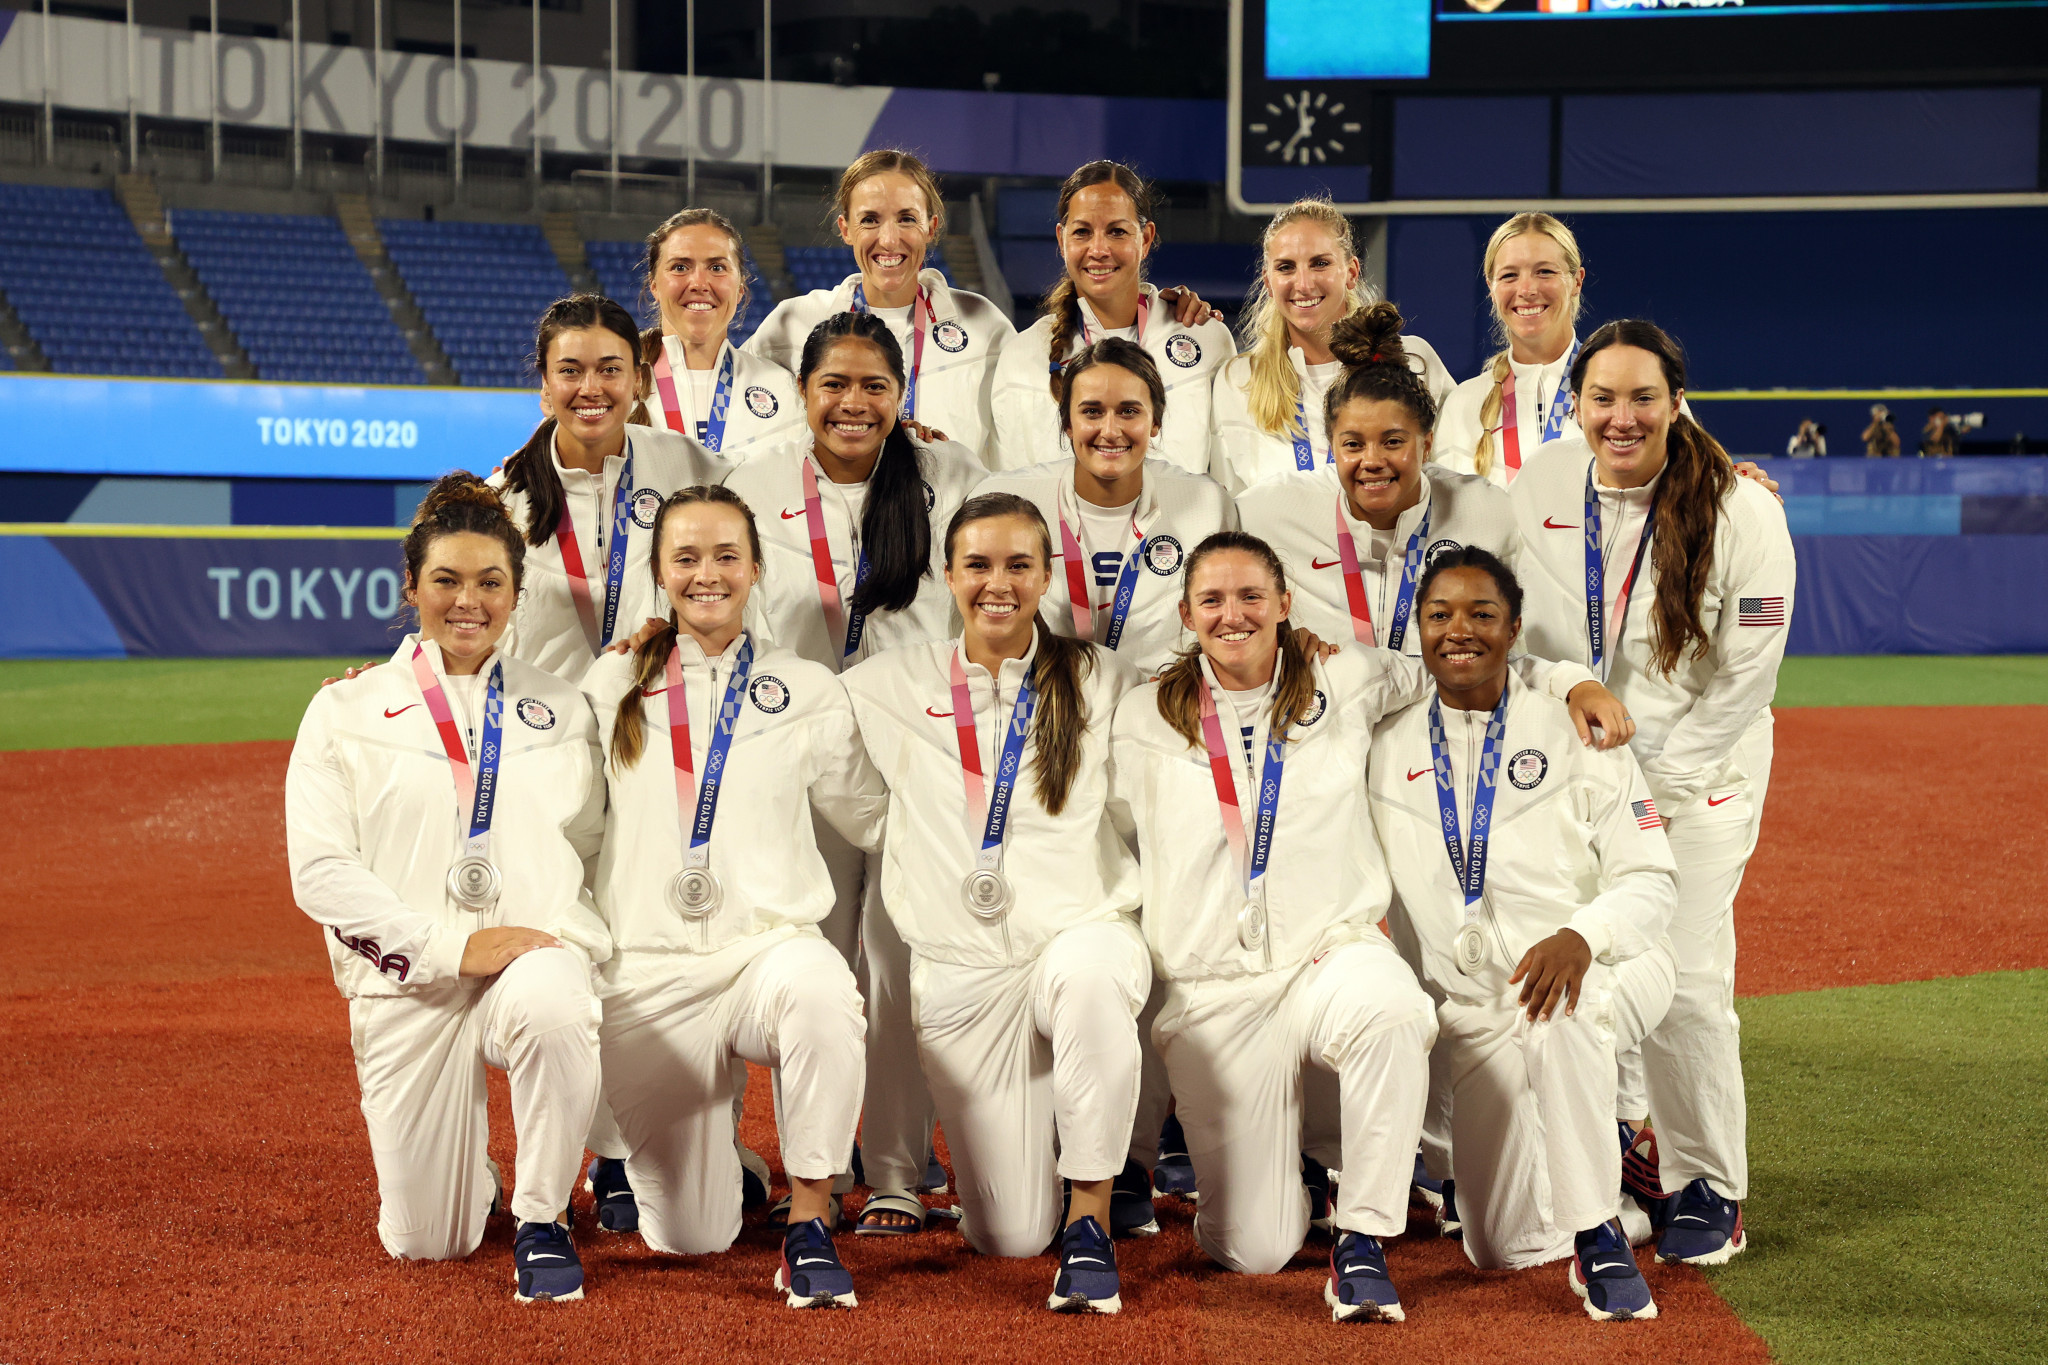 USA Softball has selected eight of the United States' silver medal-winning Olympic team to compete at the Birmingham 2022 World Games ©Getty Images 